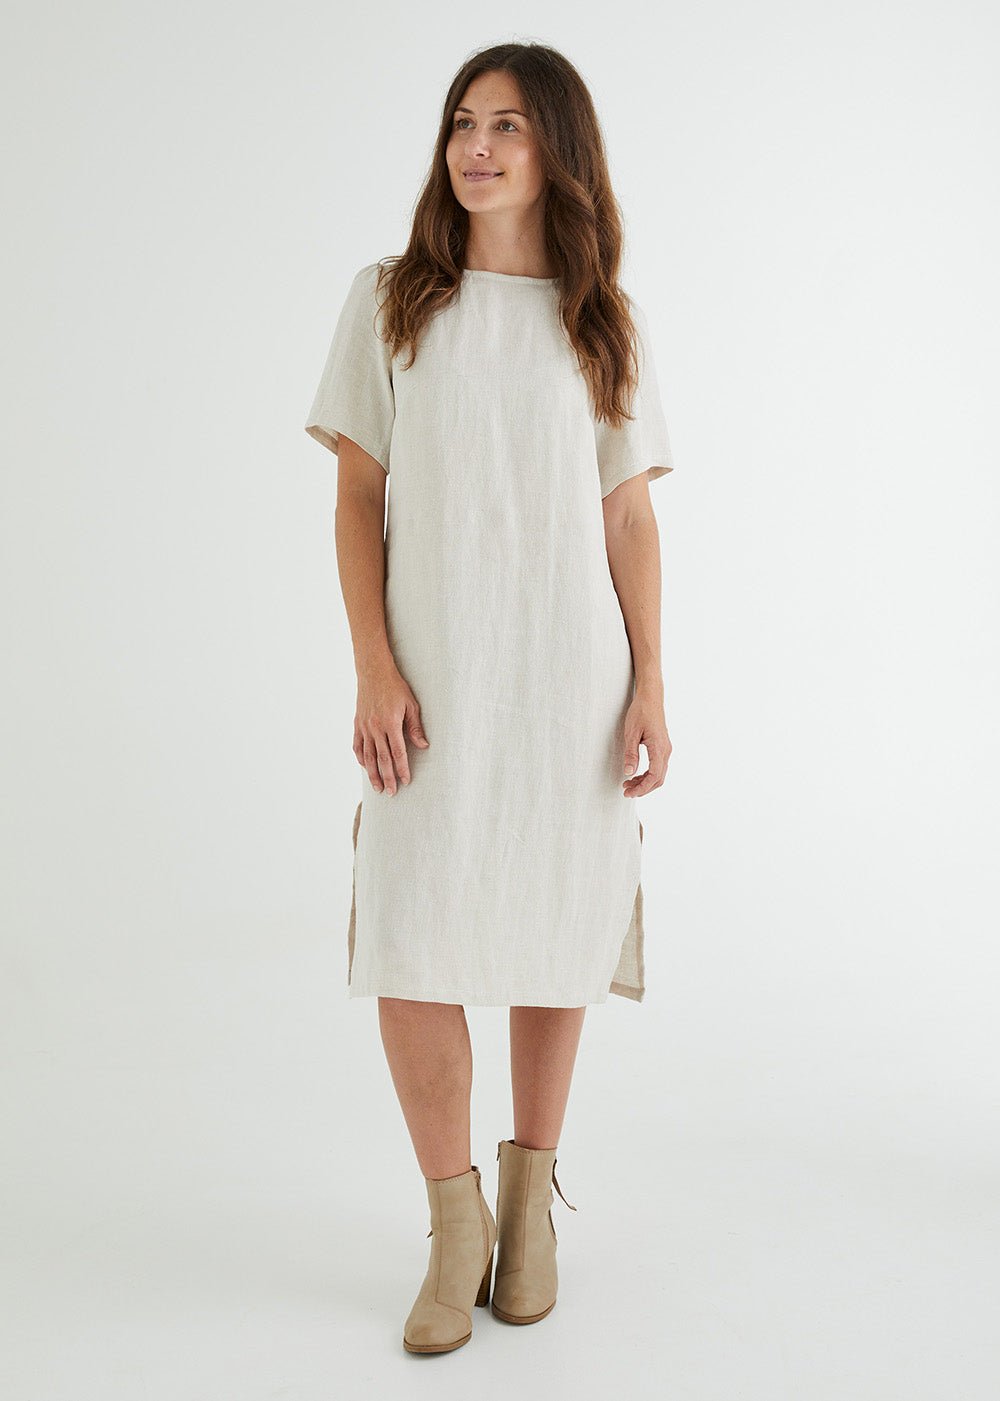 Lucy Linen Dress in Natural-Devina Louise-stride